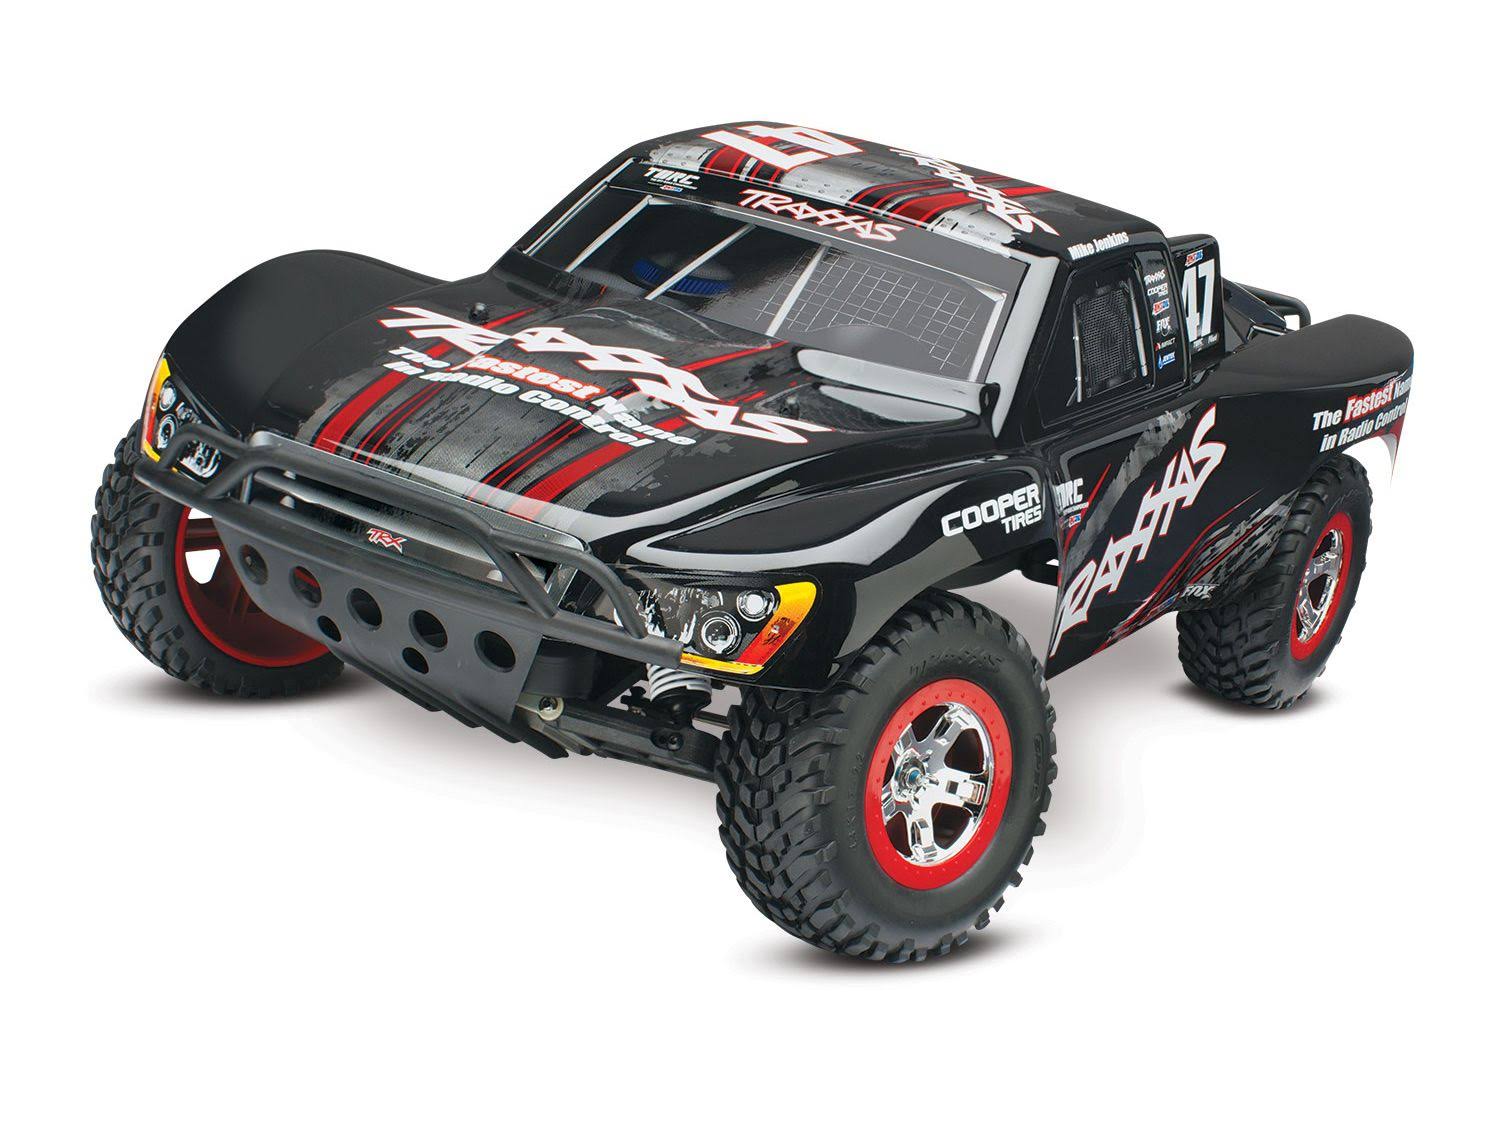 Traxxas Slash Scale 2WD Short Course Racing Truck Toy - Blue and White